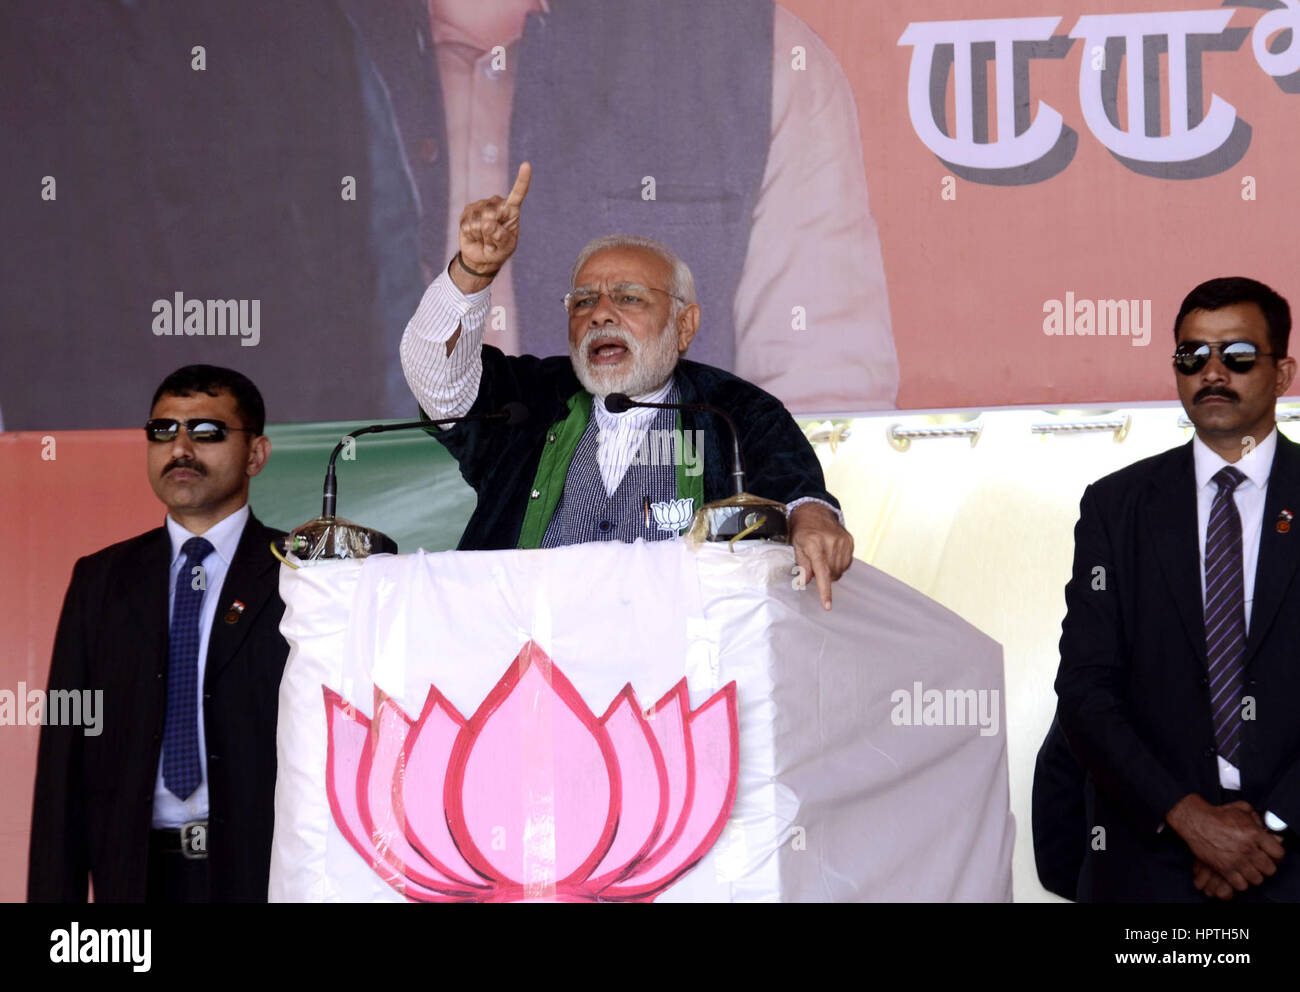 Imphal. 25th Feb, 2017. Indian Prime Minister and ruling Bharatiya Janata Party (BJP) leader Narendra Modi (C) addresses an election campaign rally of BJP at Langjing Achouba Ground in Imphal, capital of India's north eastern state Manipur on Feb 25, 2017. Credit: Stringer/Xinhua/Alamy Live News Stock Photo